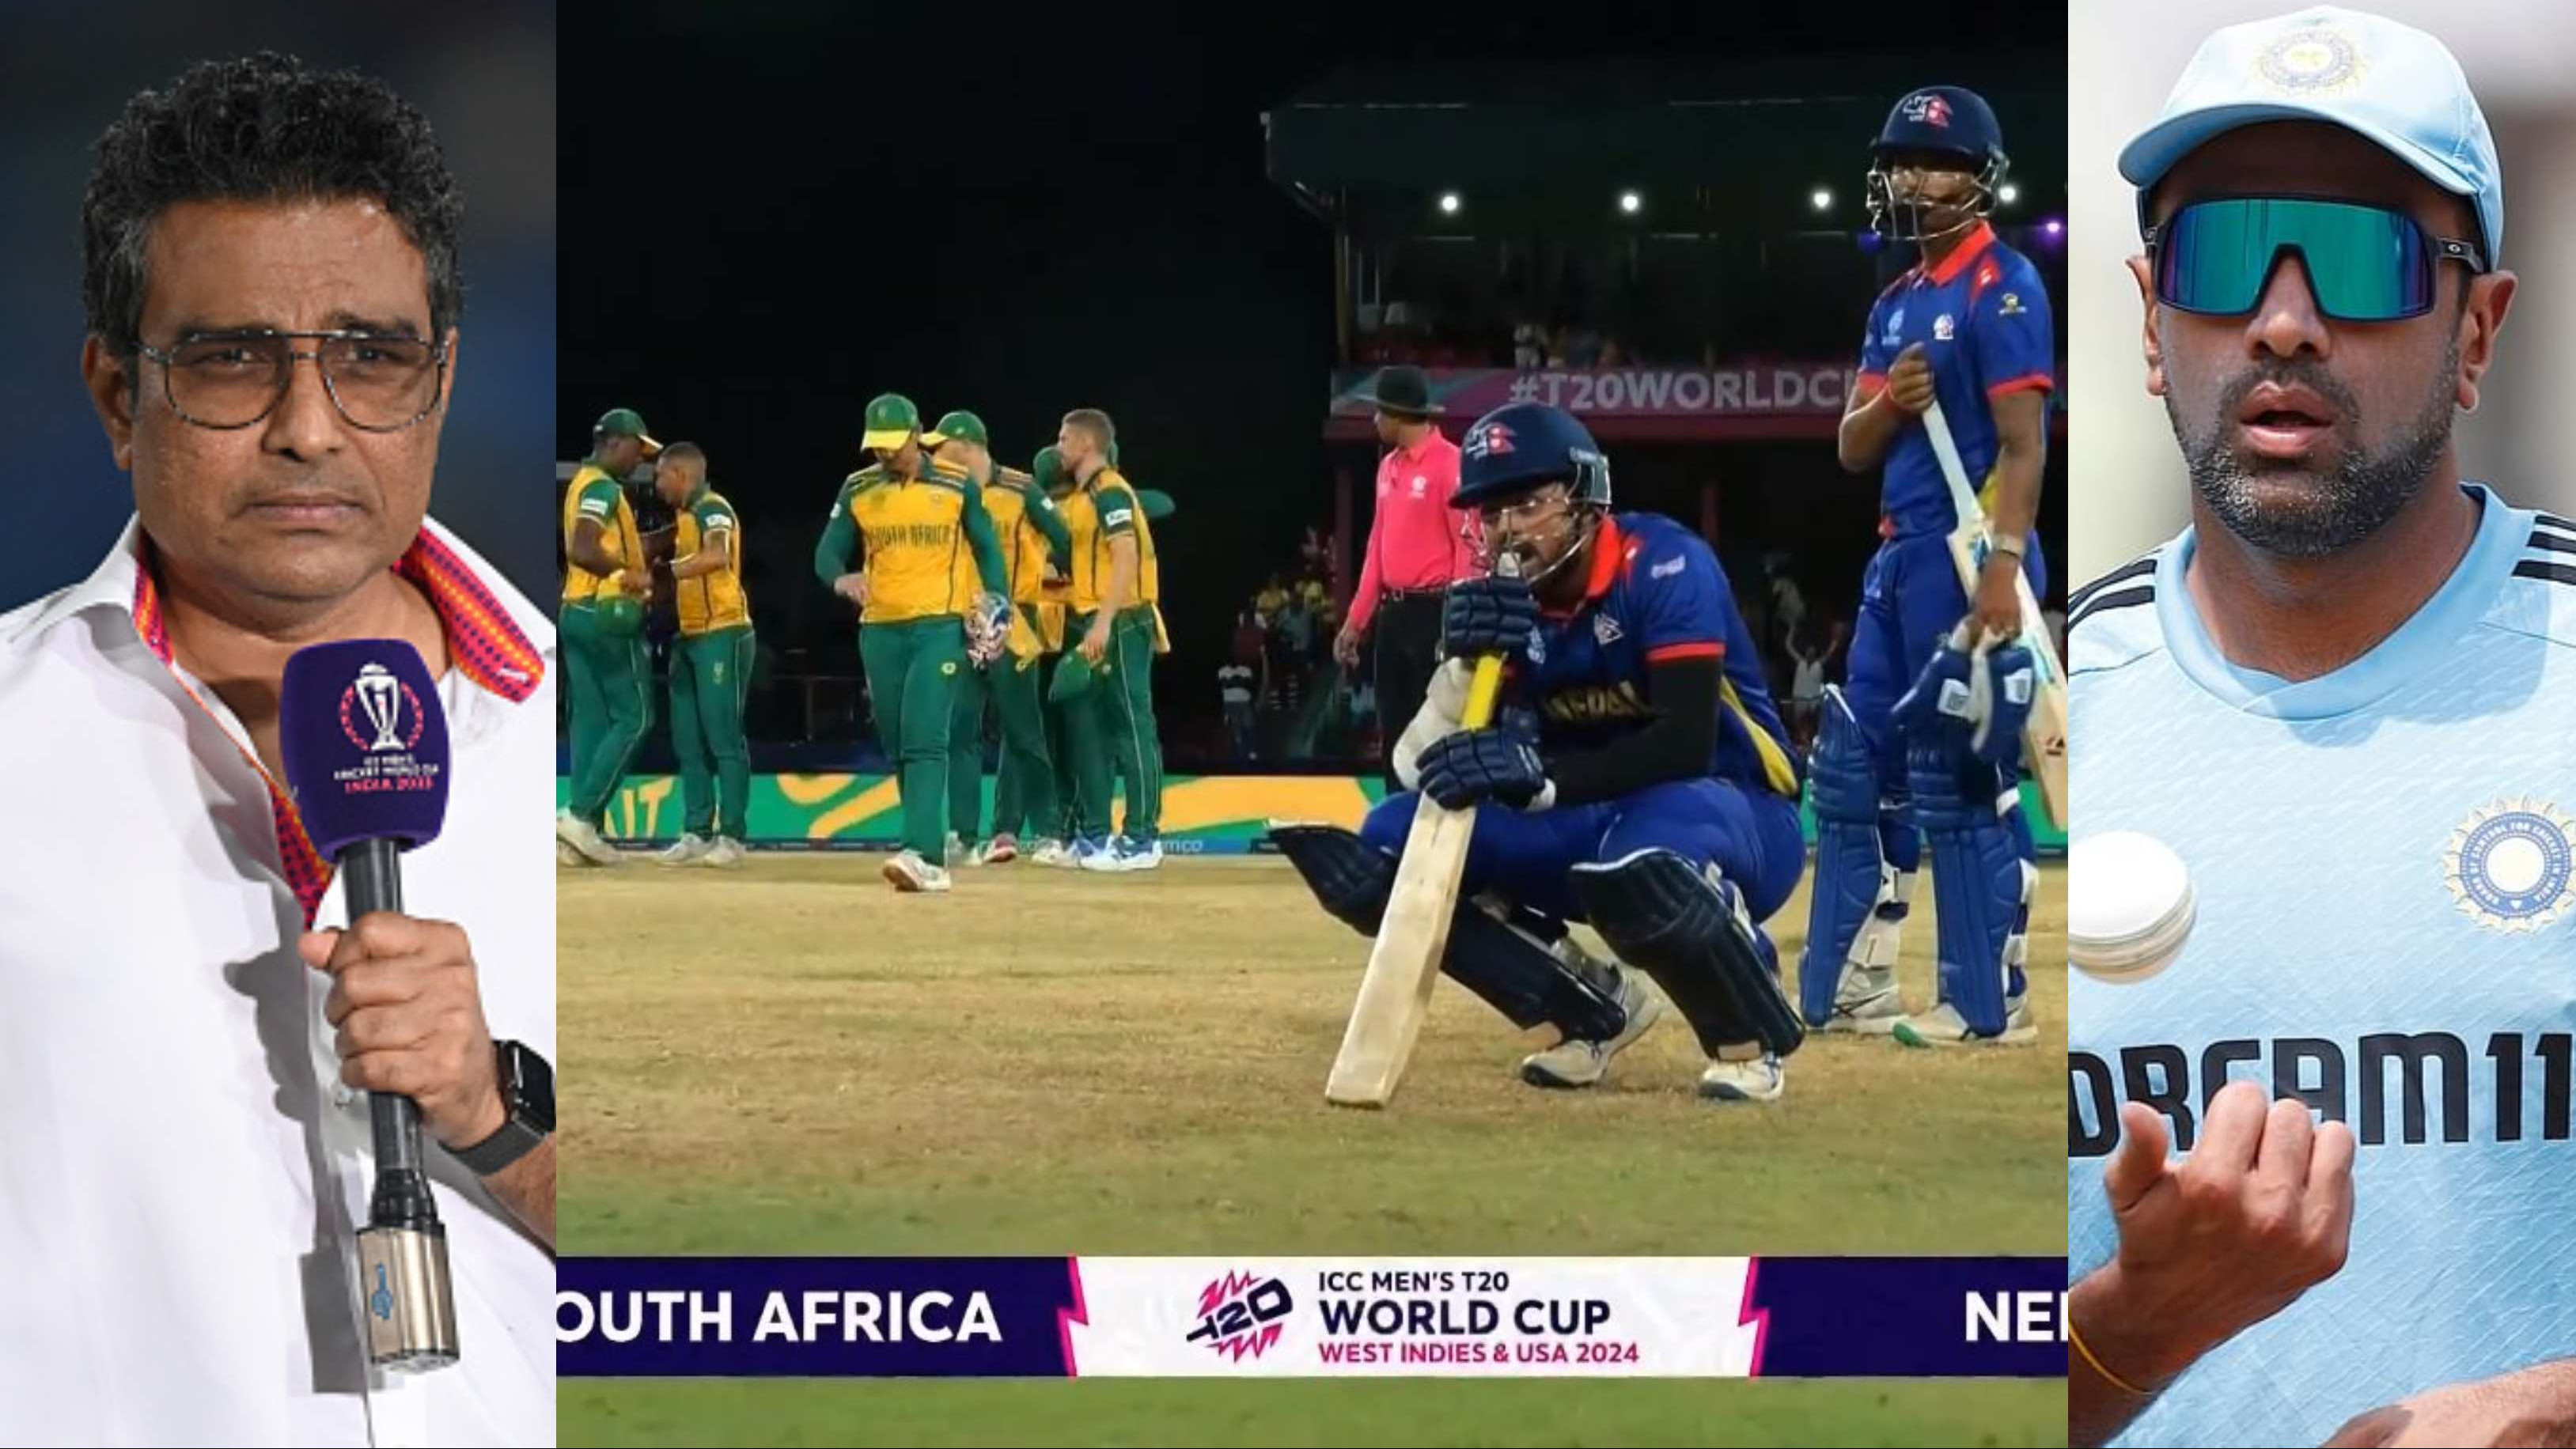 WATCH: Nepal fall agonisingly short of a historic win over South Africa on last ball; Cricket fraternity reacts